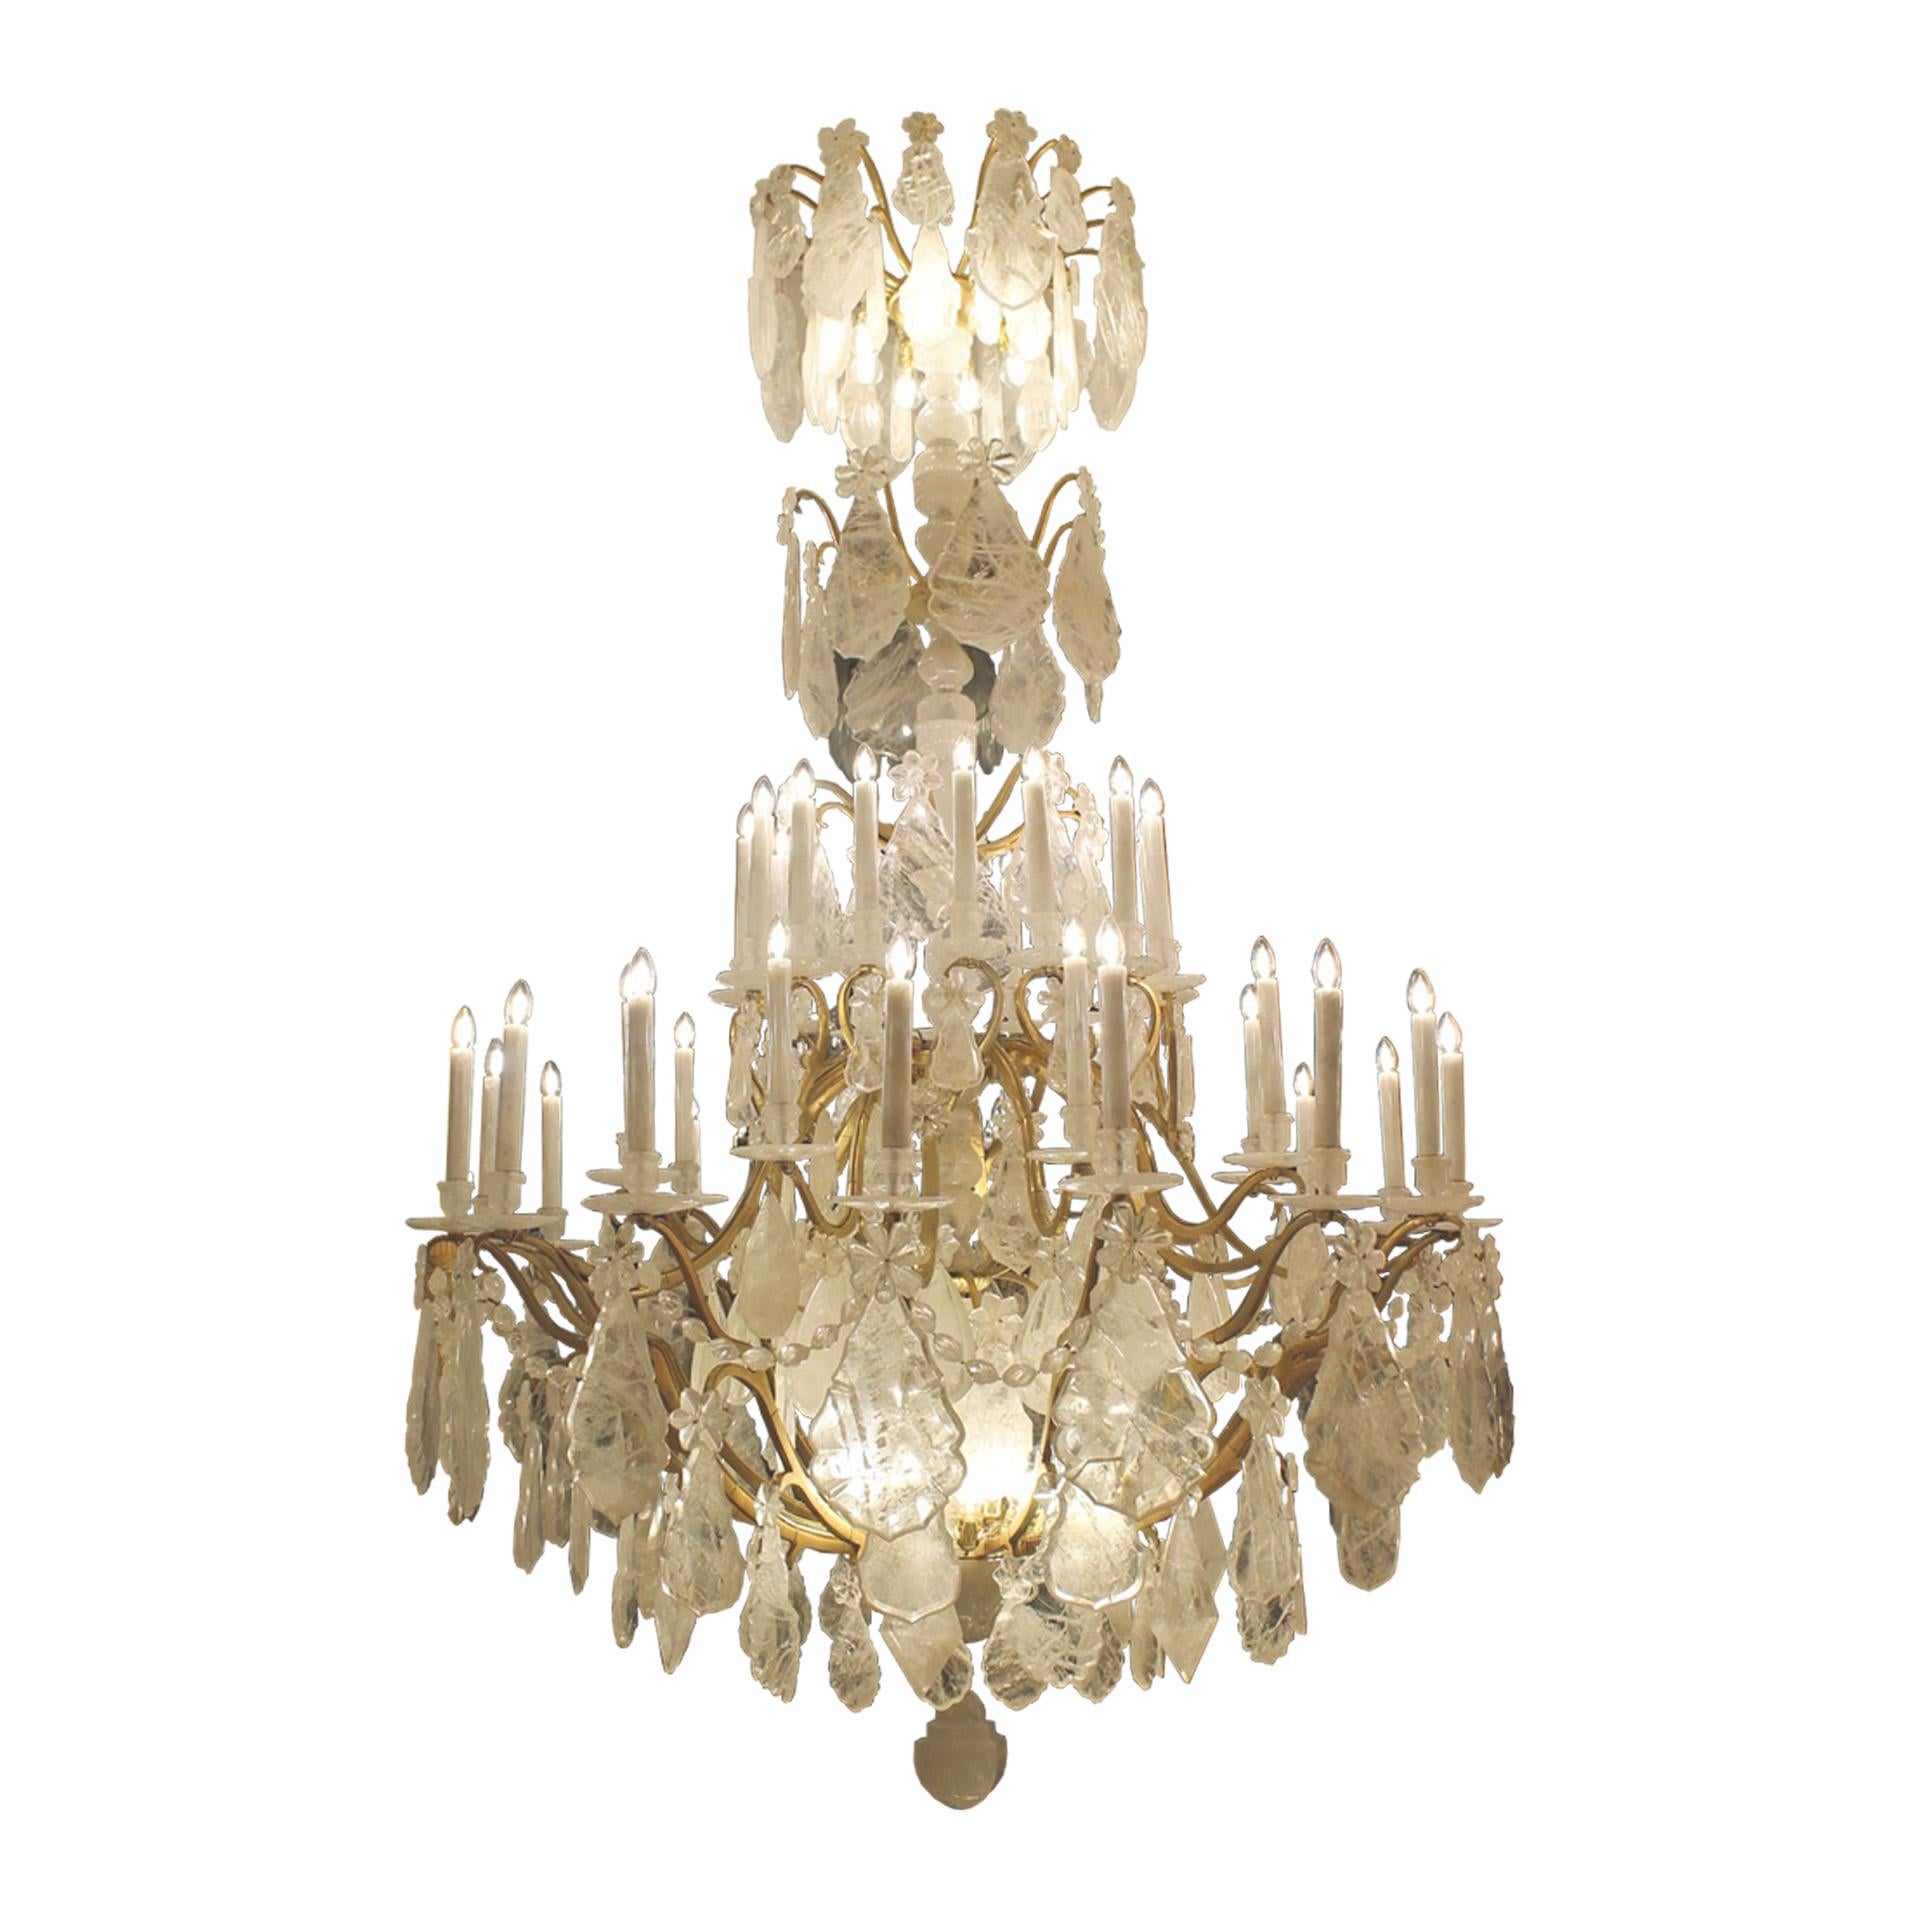 Pair of grand rock crystal chandeliers in the Louis XV style. Original circa 1910 Gilt bronze frame with 80 lights, with an antique finish, redressed in rock crystal by Dimitri Stefanov. Dimensions : Height 300 cm x 180 cm diameter.  

All redressed